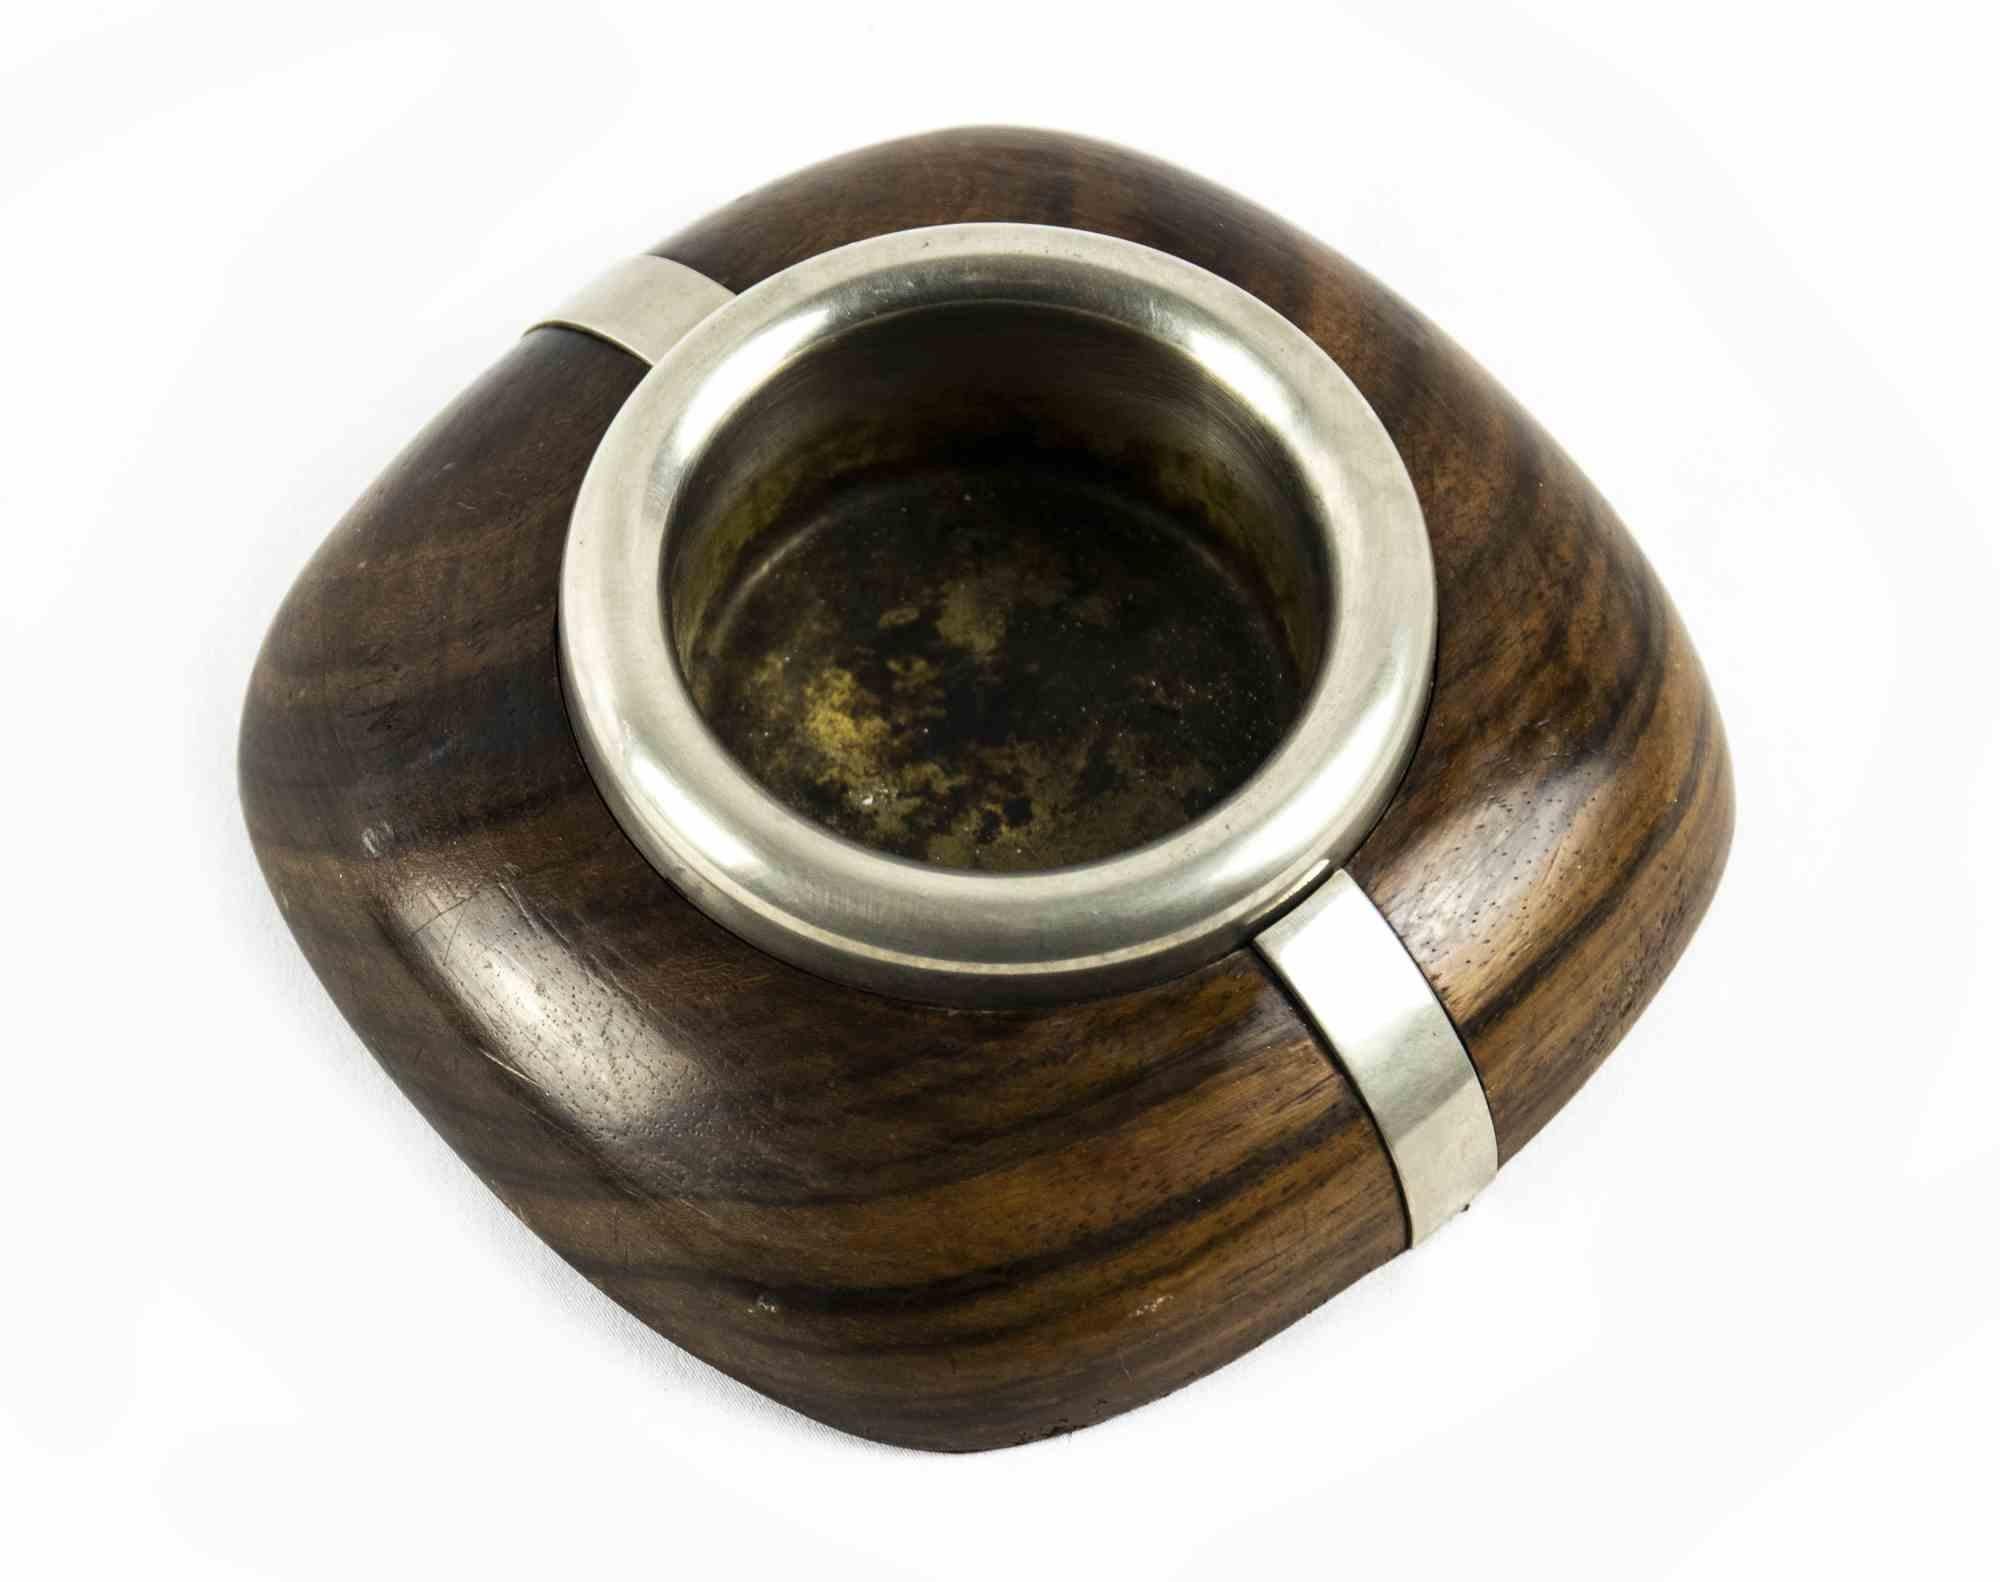 Vintage metal and wood ashtray is an original decorative object realized in the 1970s.

Made in Italy.

Dimensions: 6 x 19.5 cm. 

Mint conditions.